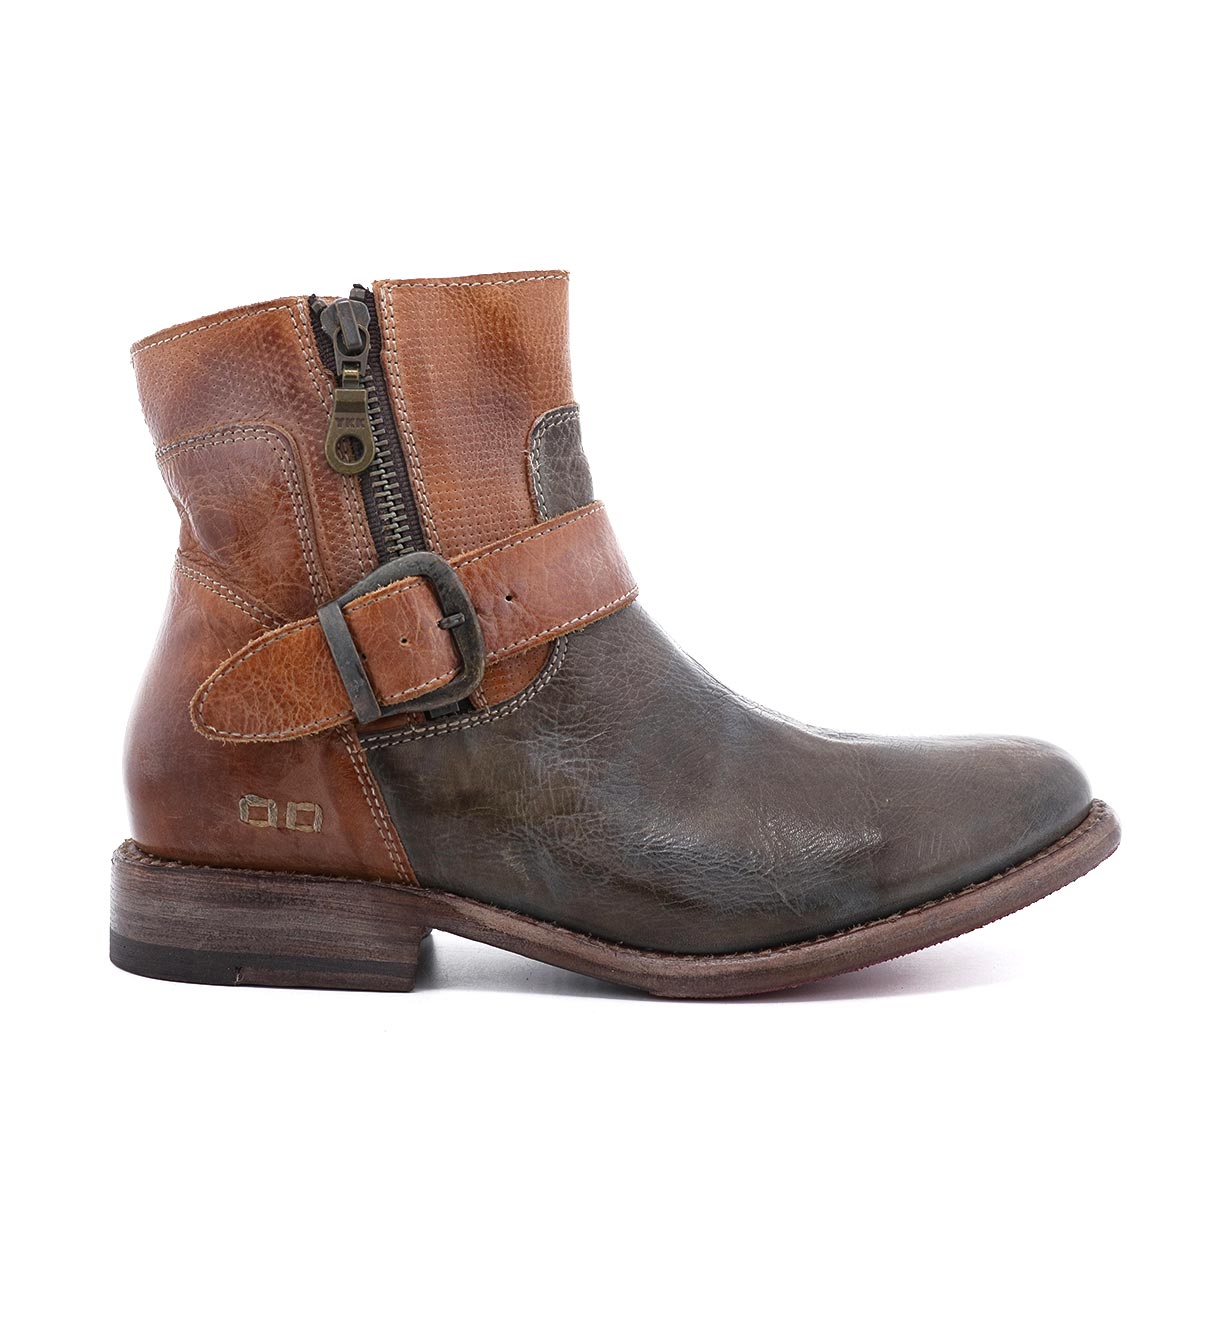 A Becca ankle boot by Bed Stu with a buckle and zipper.